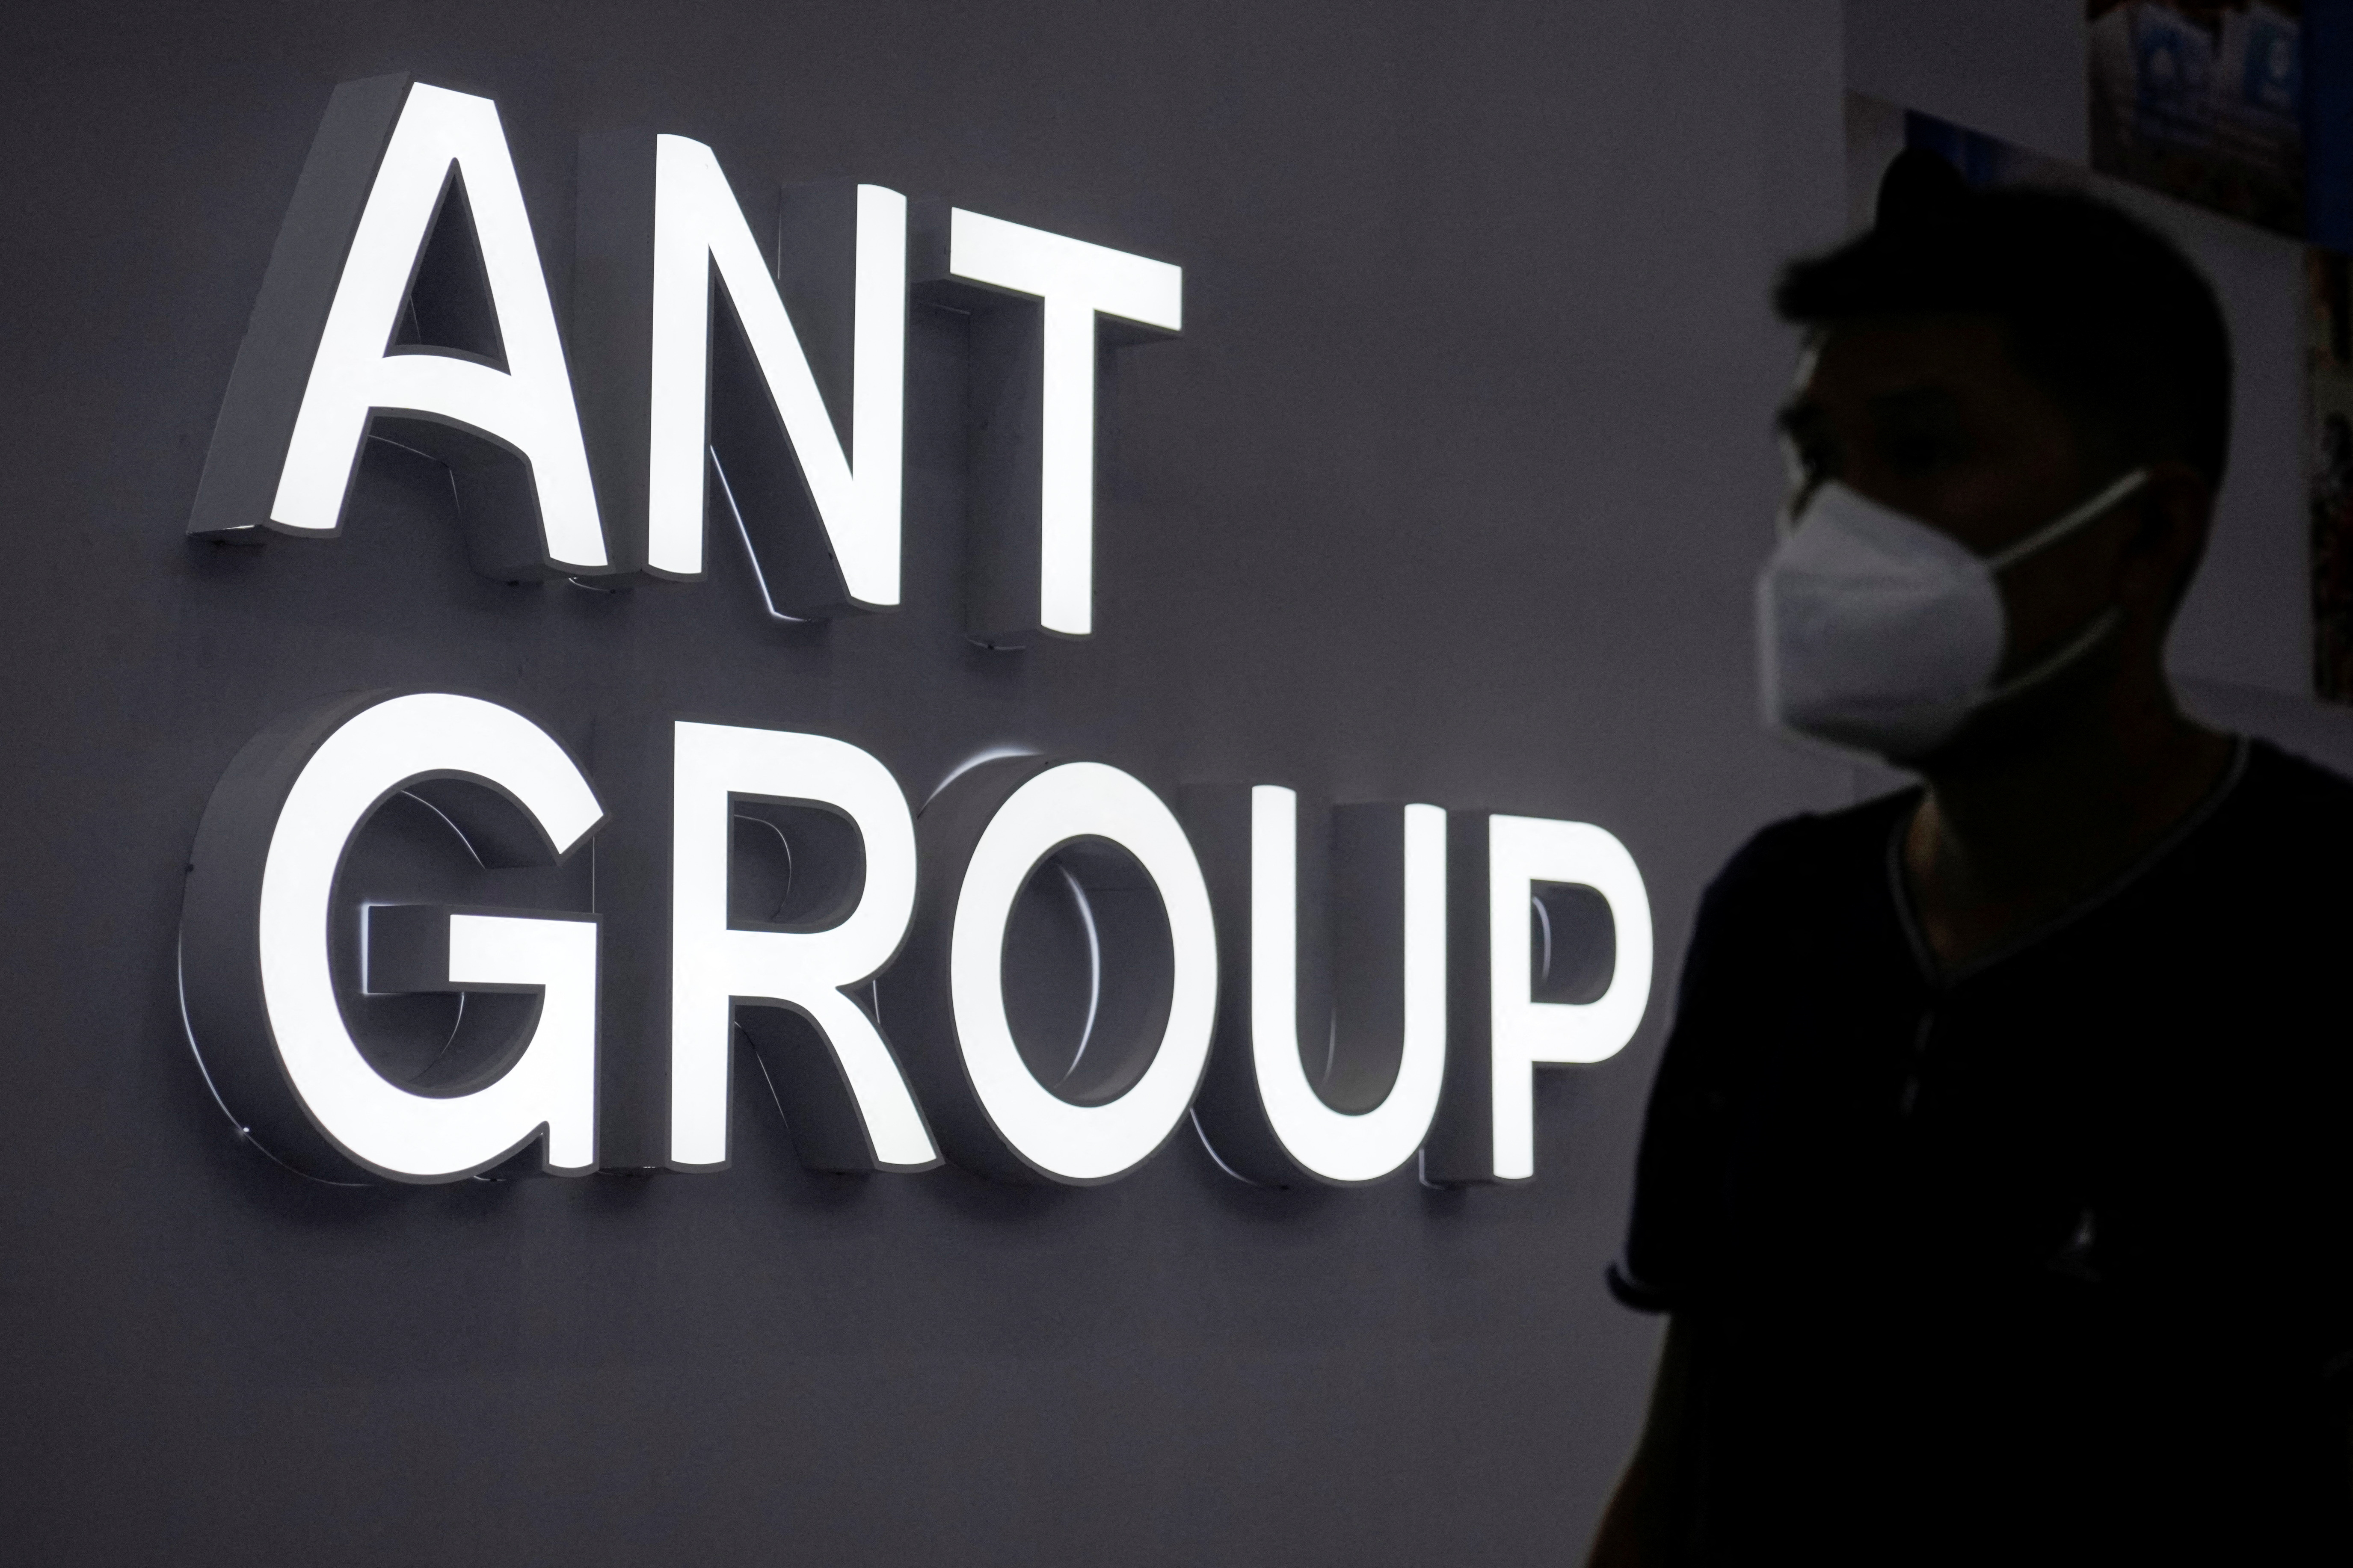 The billionaire founder of Alibaba, Jack Ma, finally gave up control of Ant Group (REUTERS / Aly Song / File)